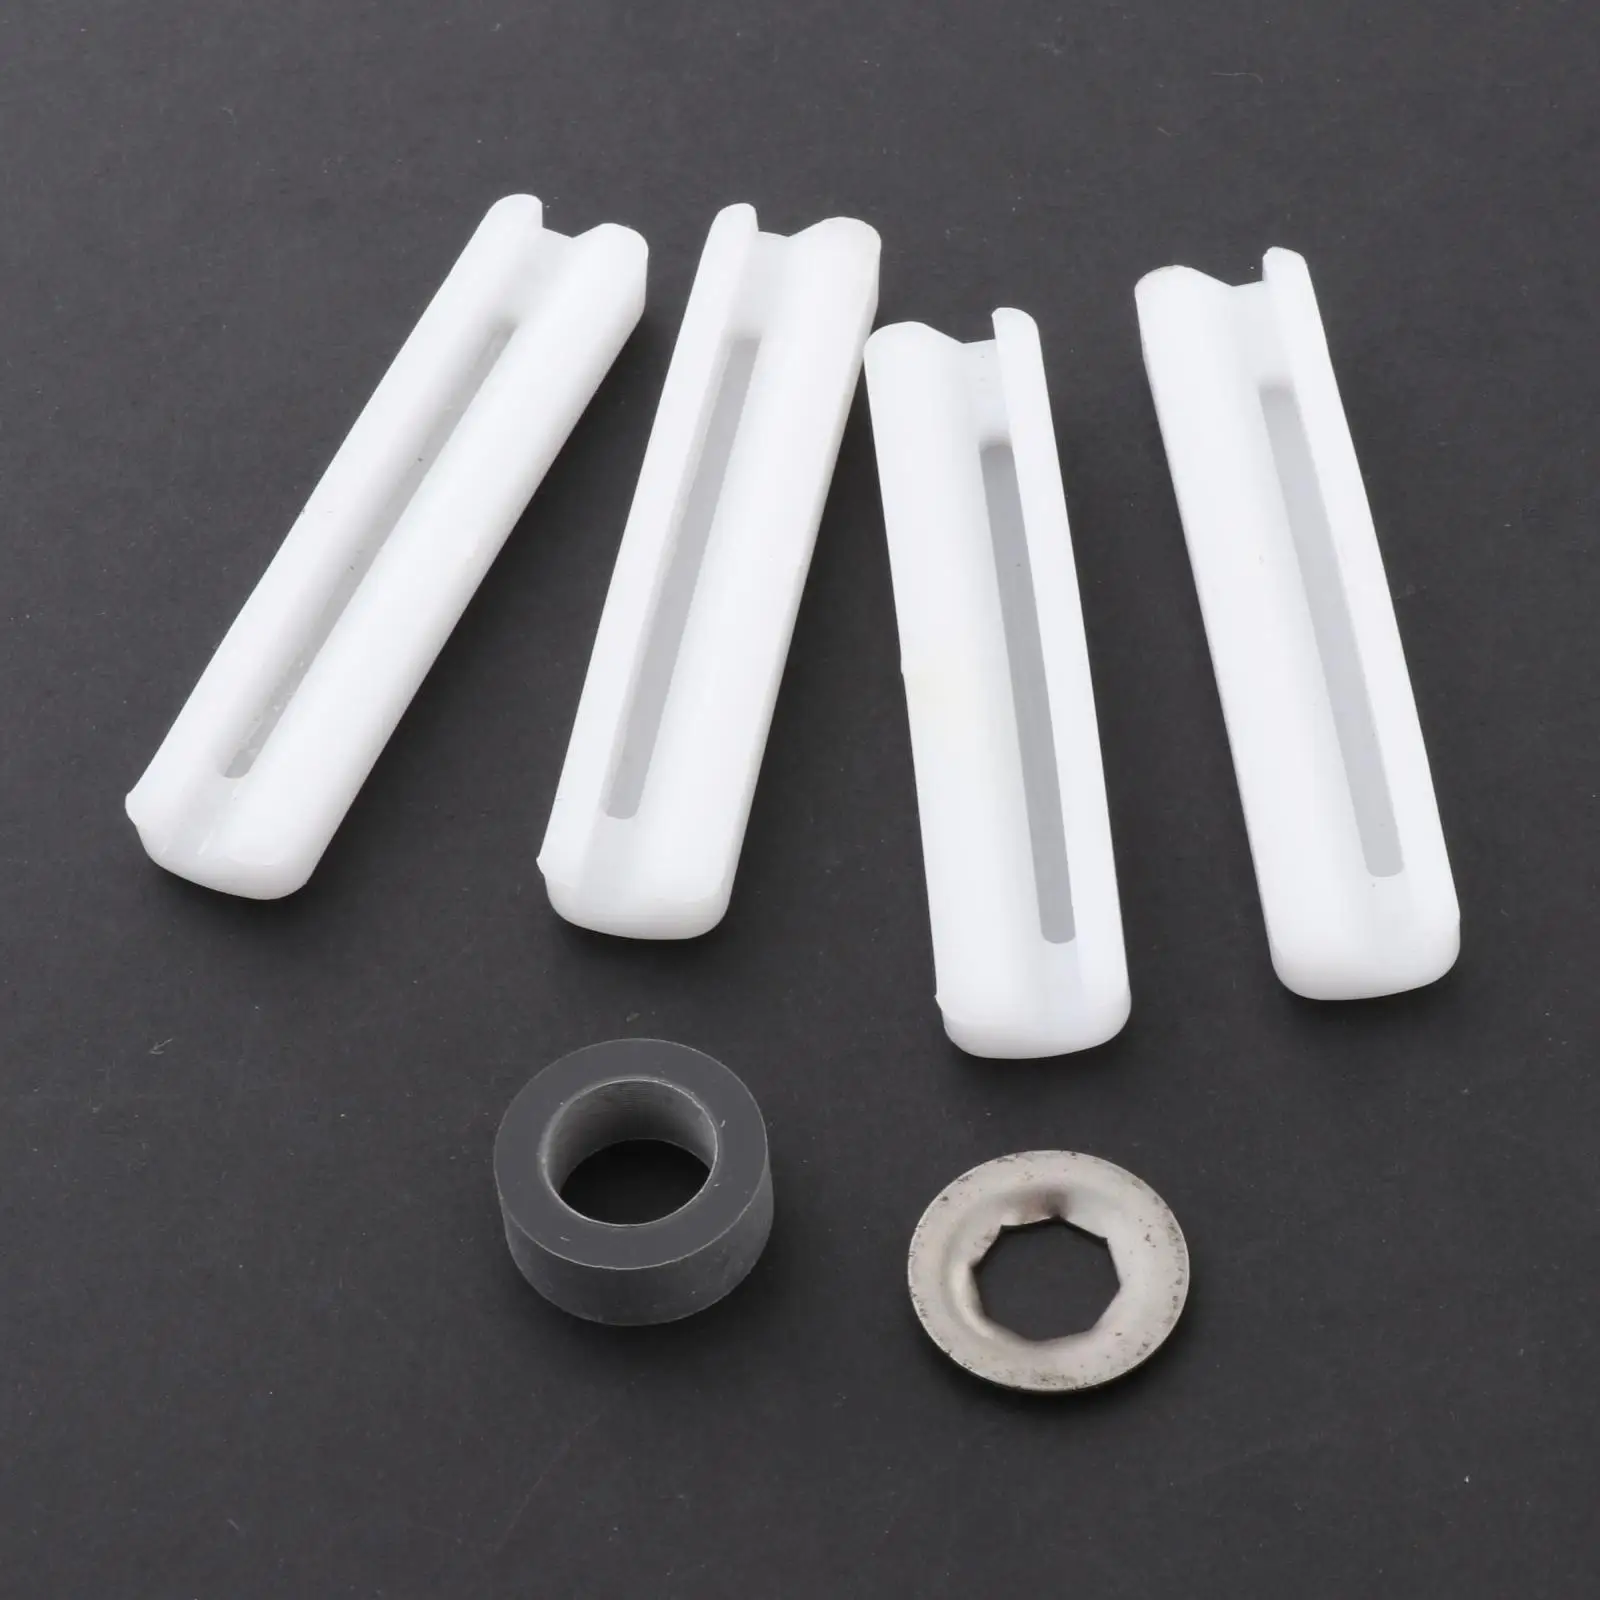 High Quality Rear Hatch Nylon Guides Slide Guide Bushings Durable Pull Down Motor Replacement For 1986-91 Camaro